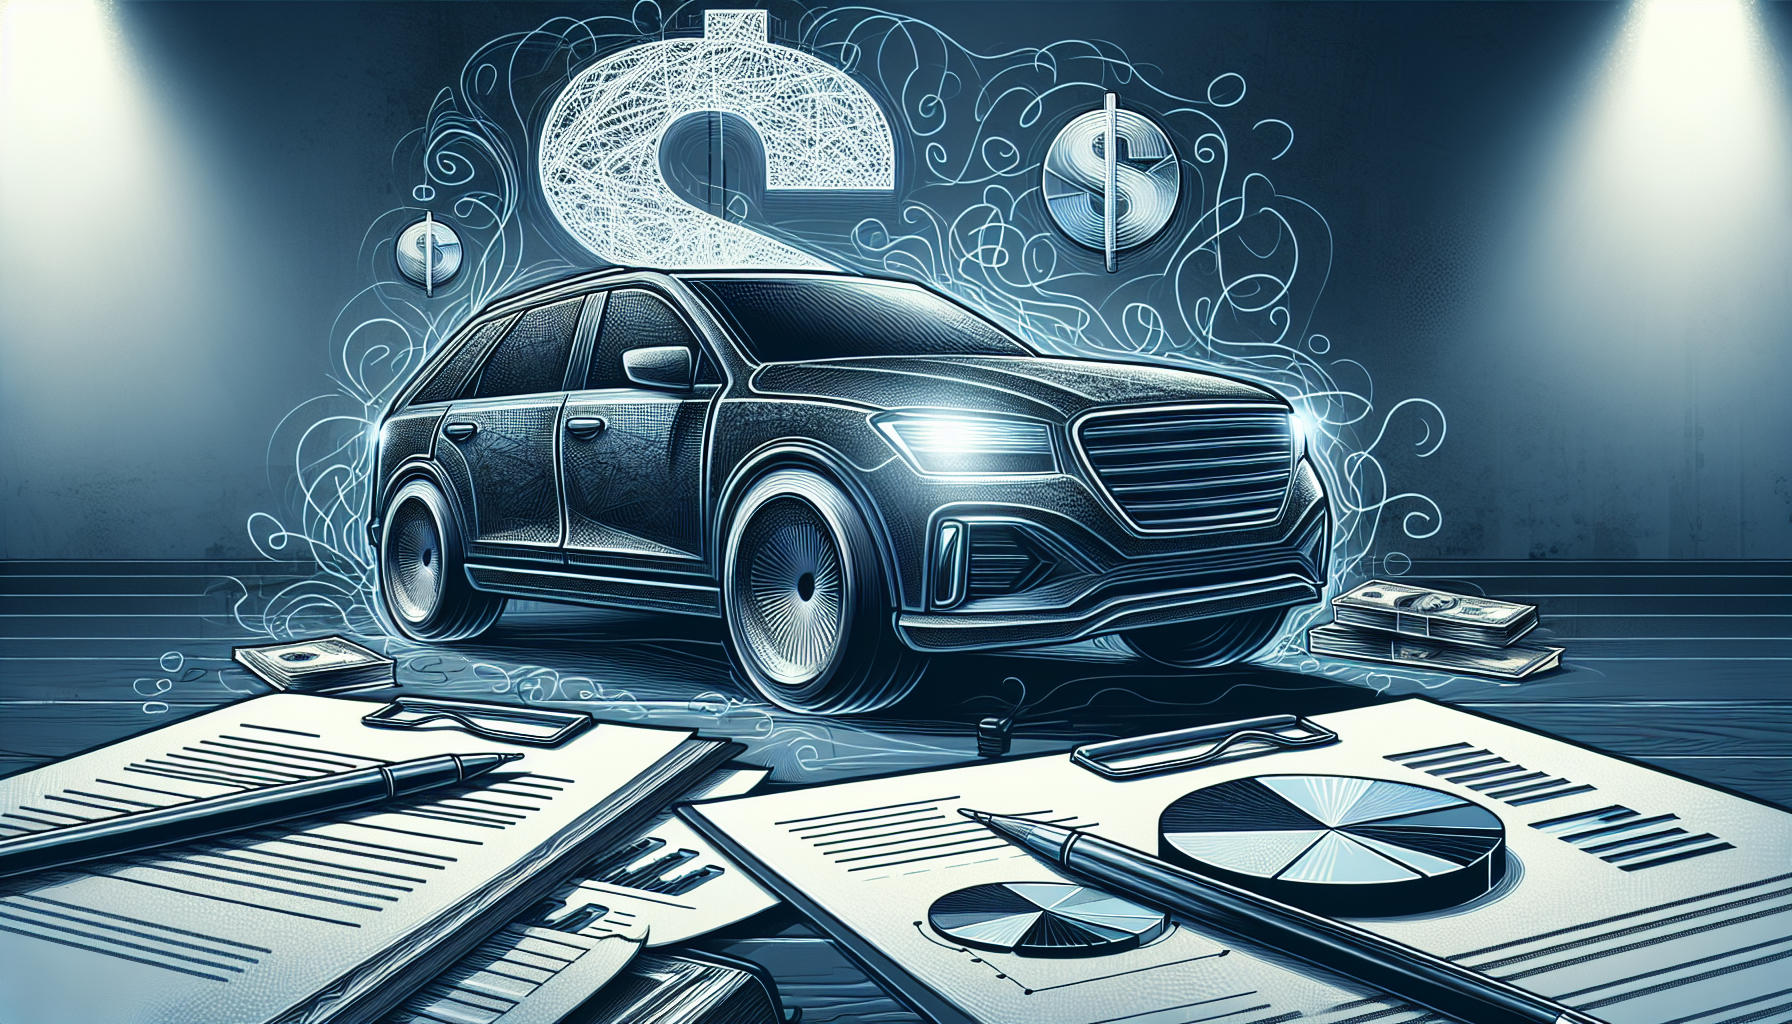 Illustration of financial documents and a car